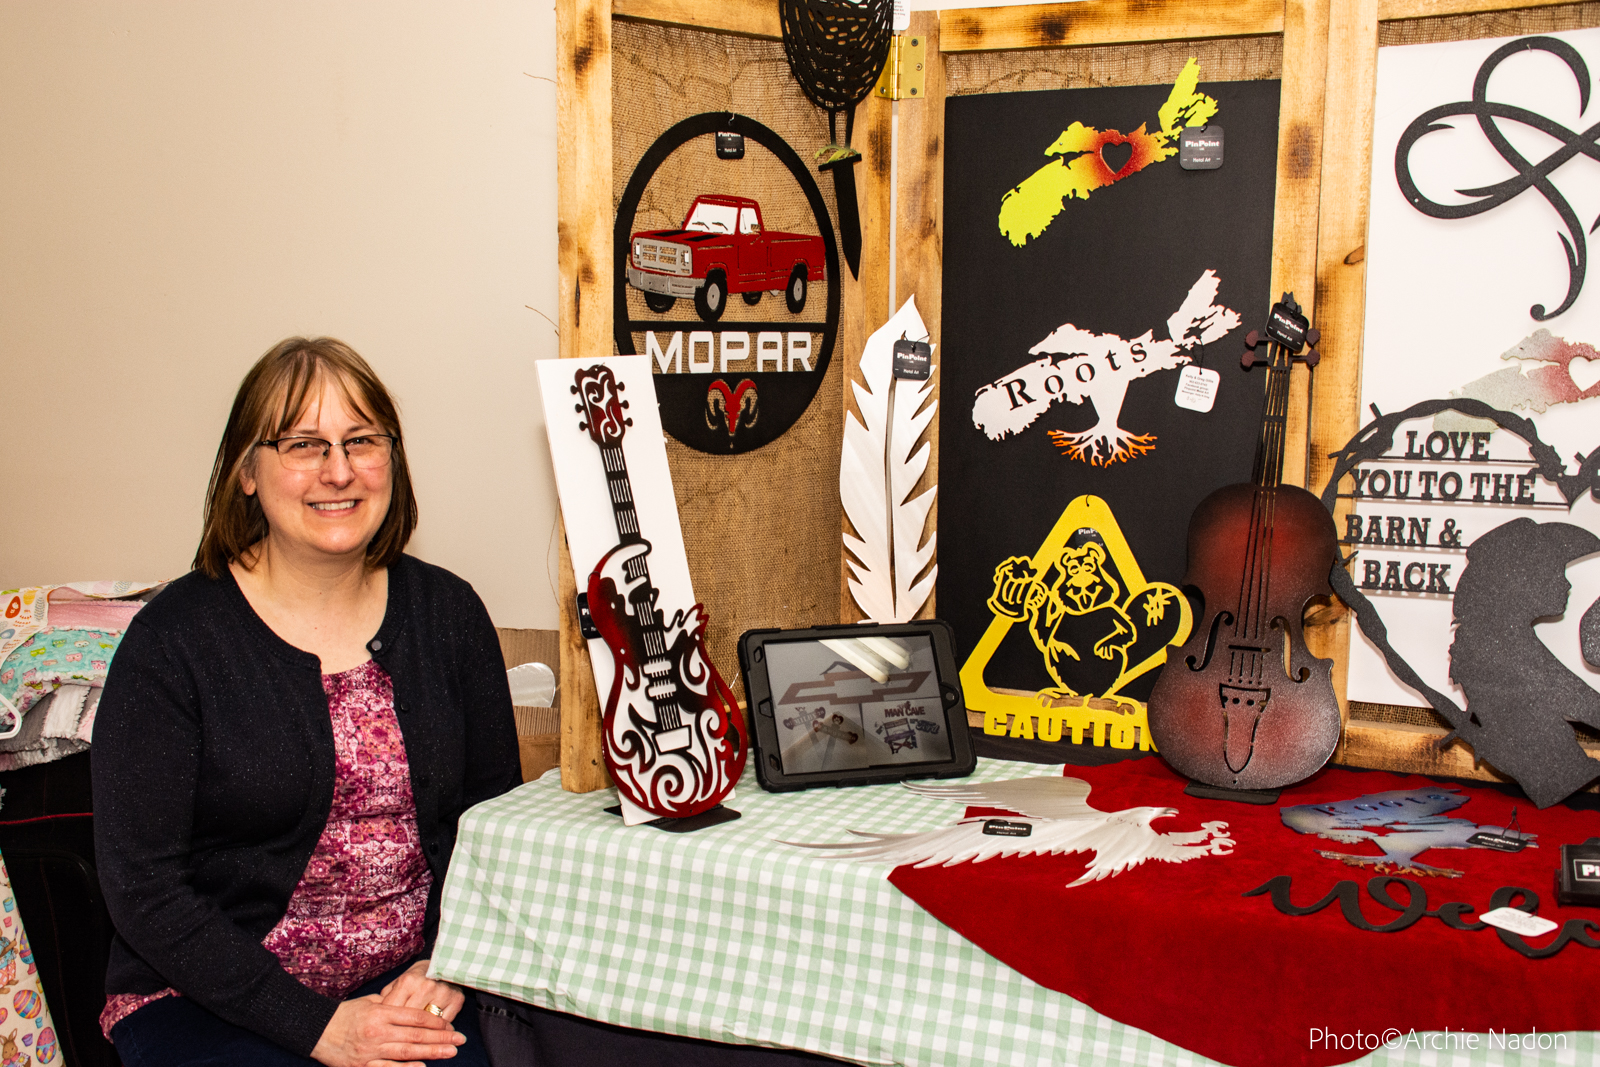 Kelly at a recent Saturday's Artisan Market selling their products.